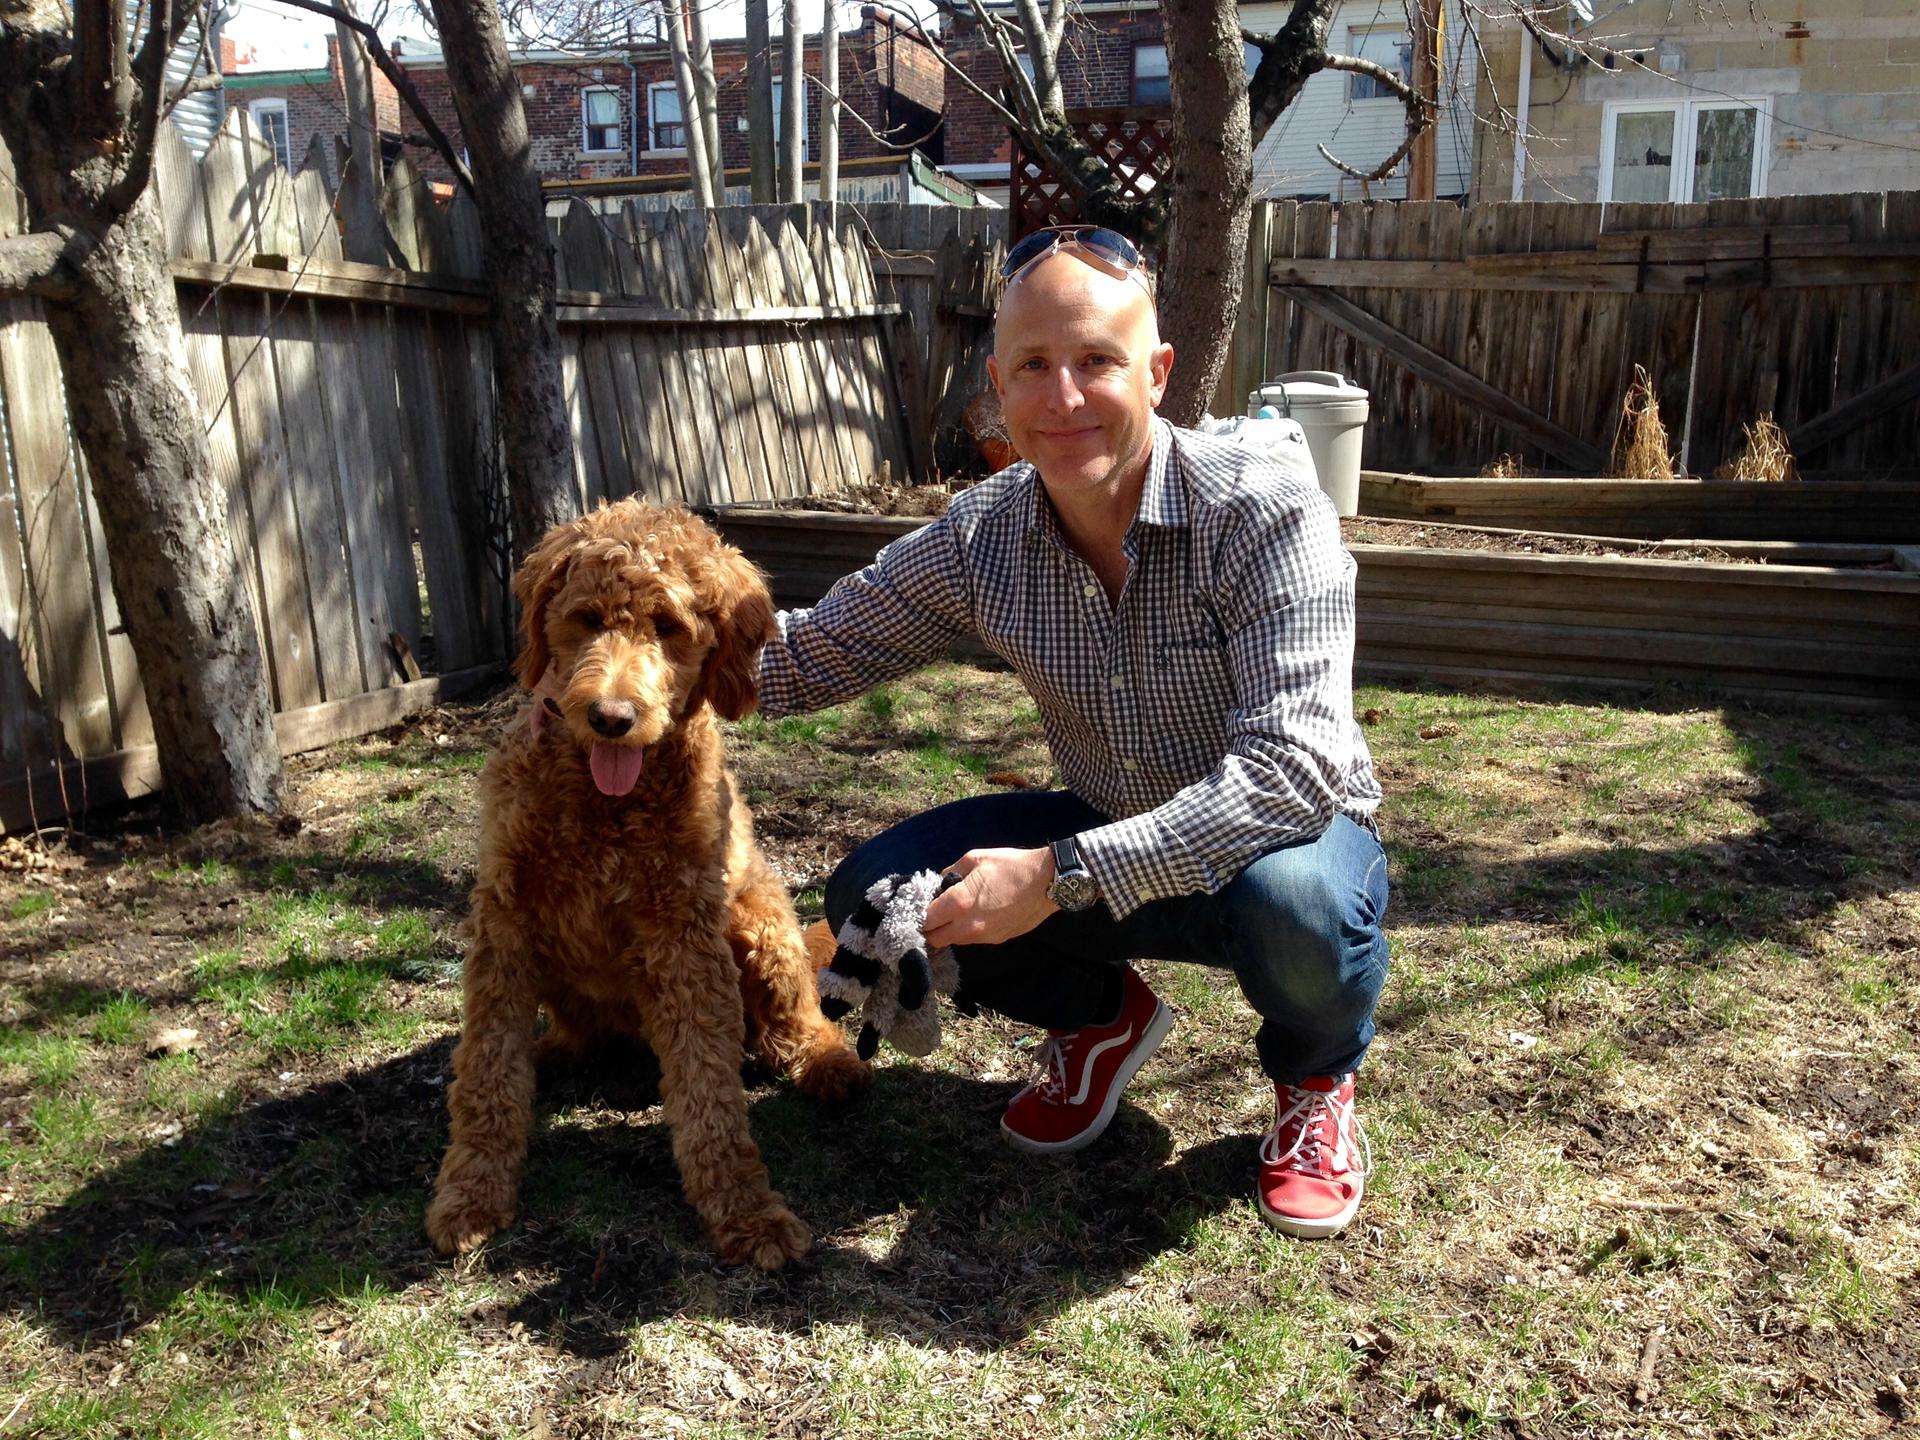 Toronto resident Bennett Mills and his dog, Russell.